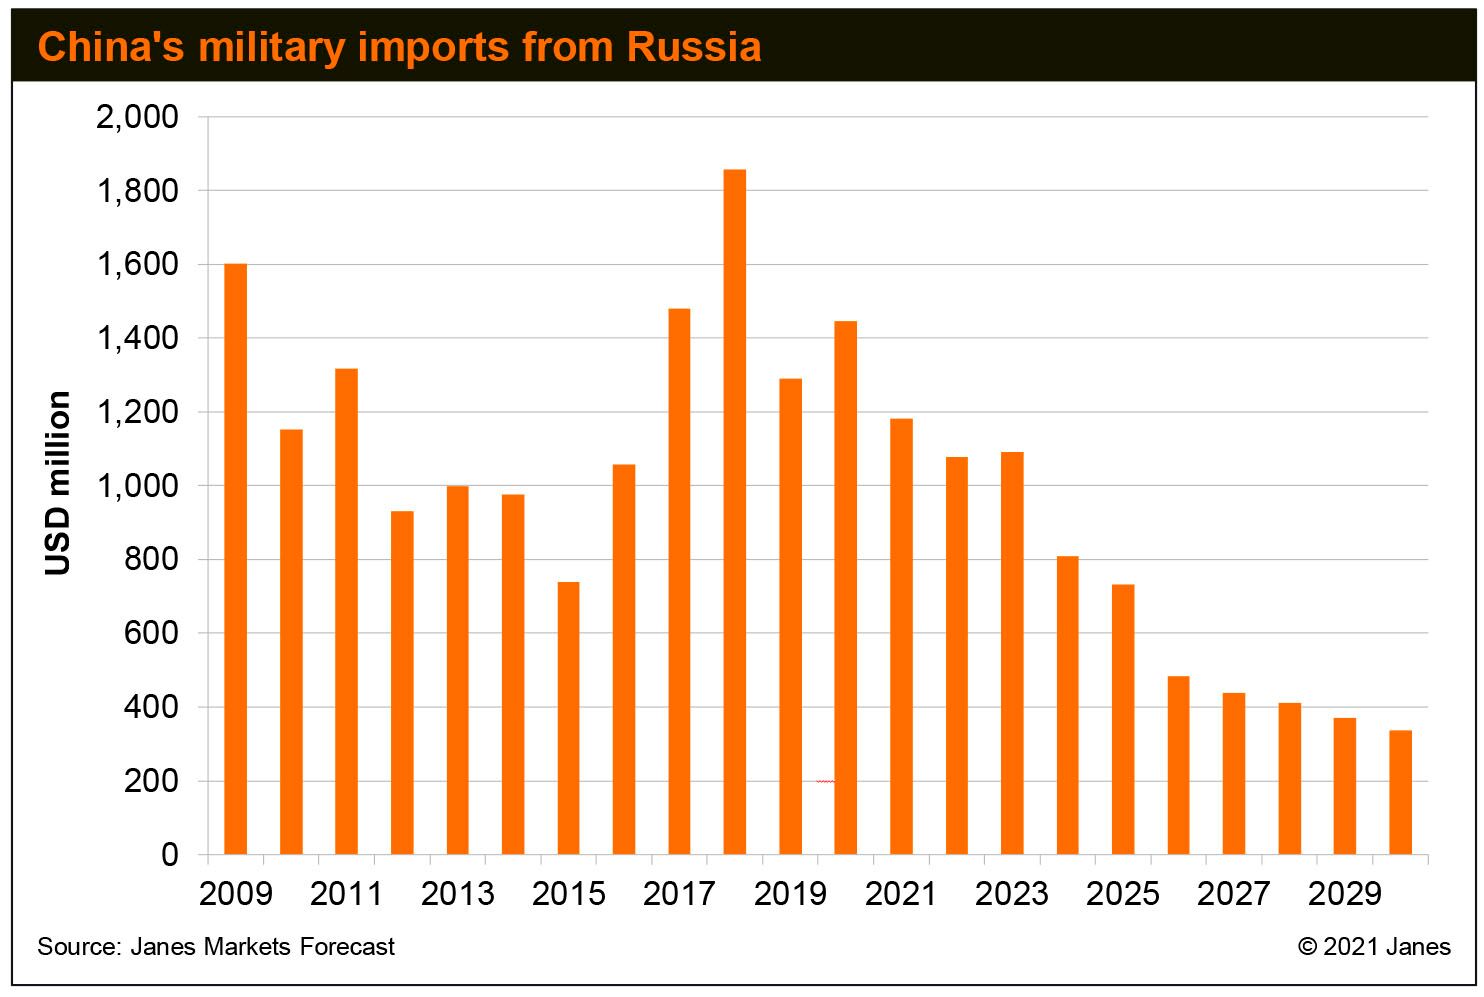 Janes 
        data shows that China's military imports from Russia increased after 2015, but are now starting to decline.
       (Janes Markets Forecast)